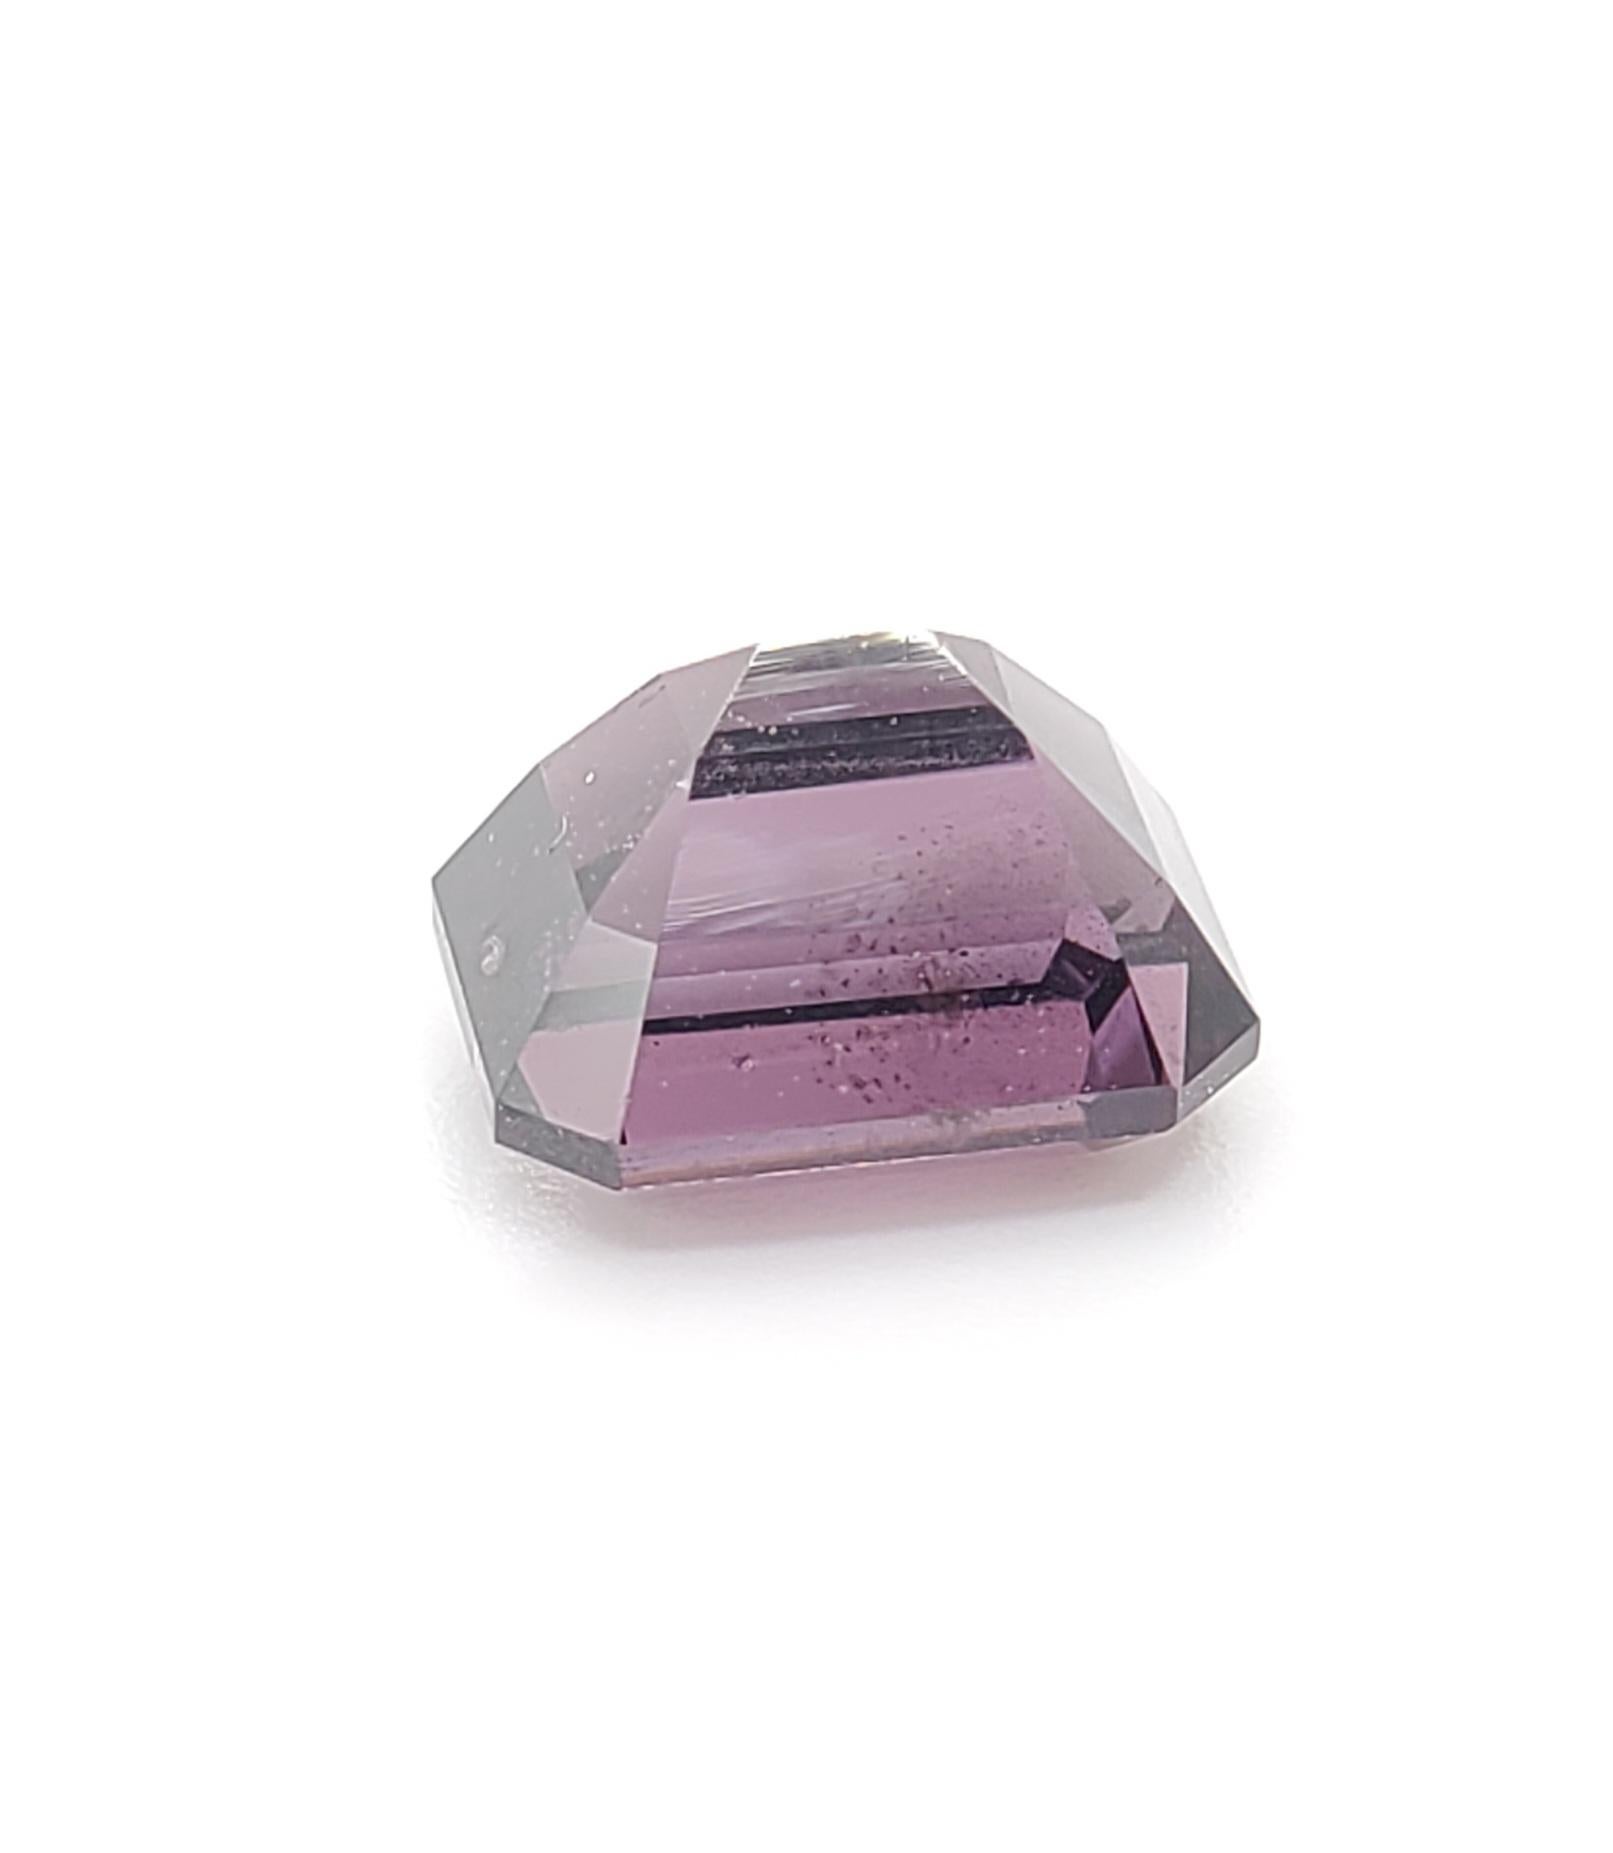 This pretty Reddish- Purple spinel Octagonal cut , weighs 1.91 carats and would make a beautiful 3-stone ring, though its shape lends itself to a variety of possibilities! It measures 7.24 x 5.72 x4.98 millimeters, is eye clean, brilliant, and